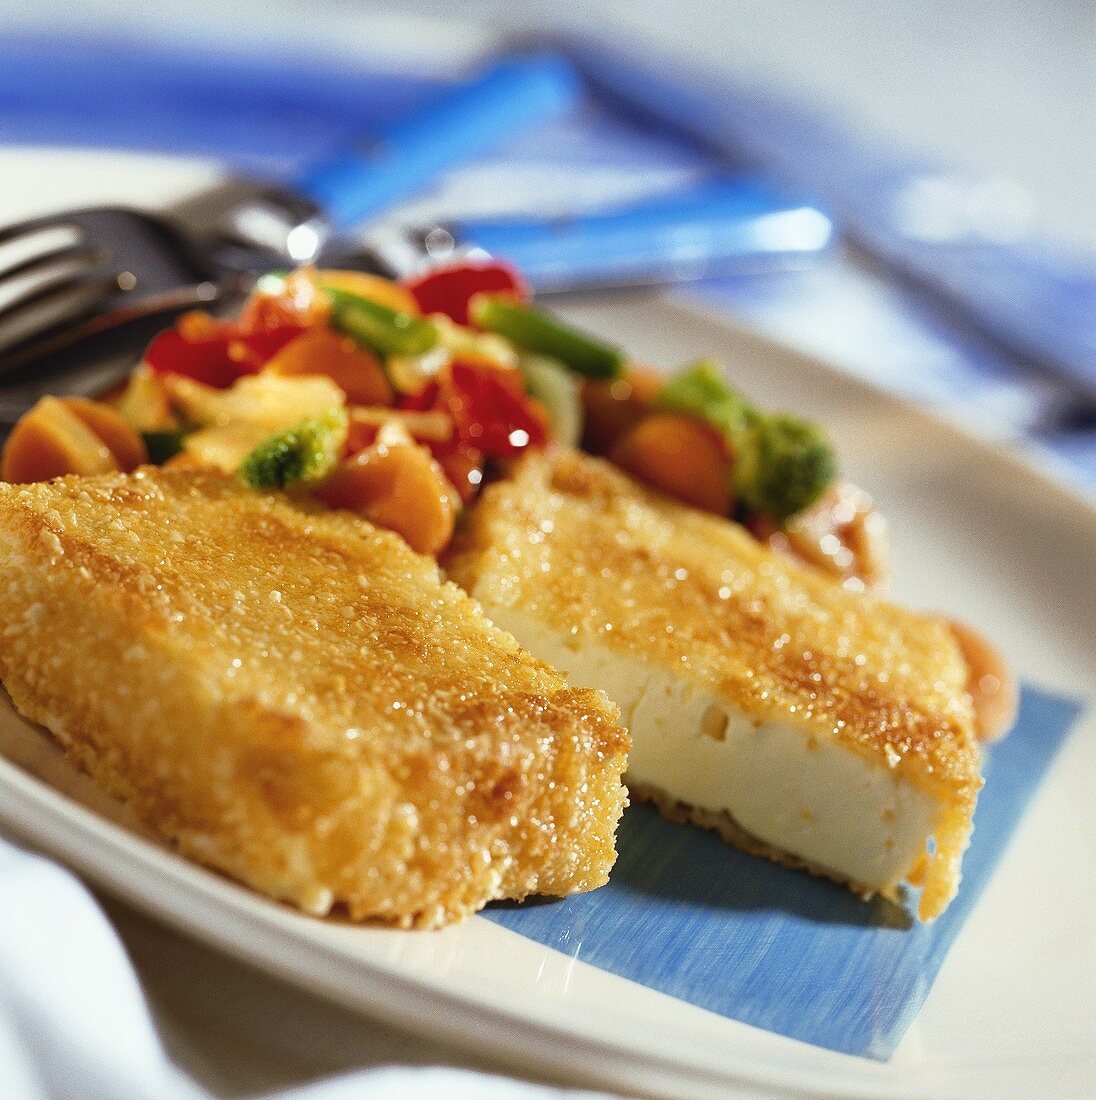 Breaded sheep's cheese with stir-fried vegetables